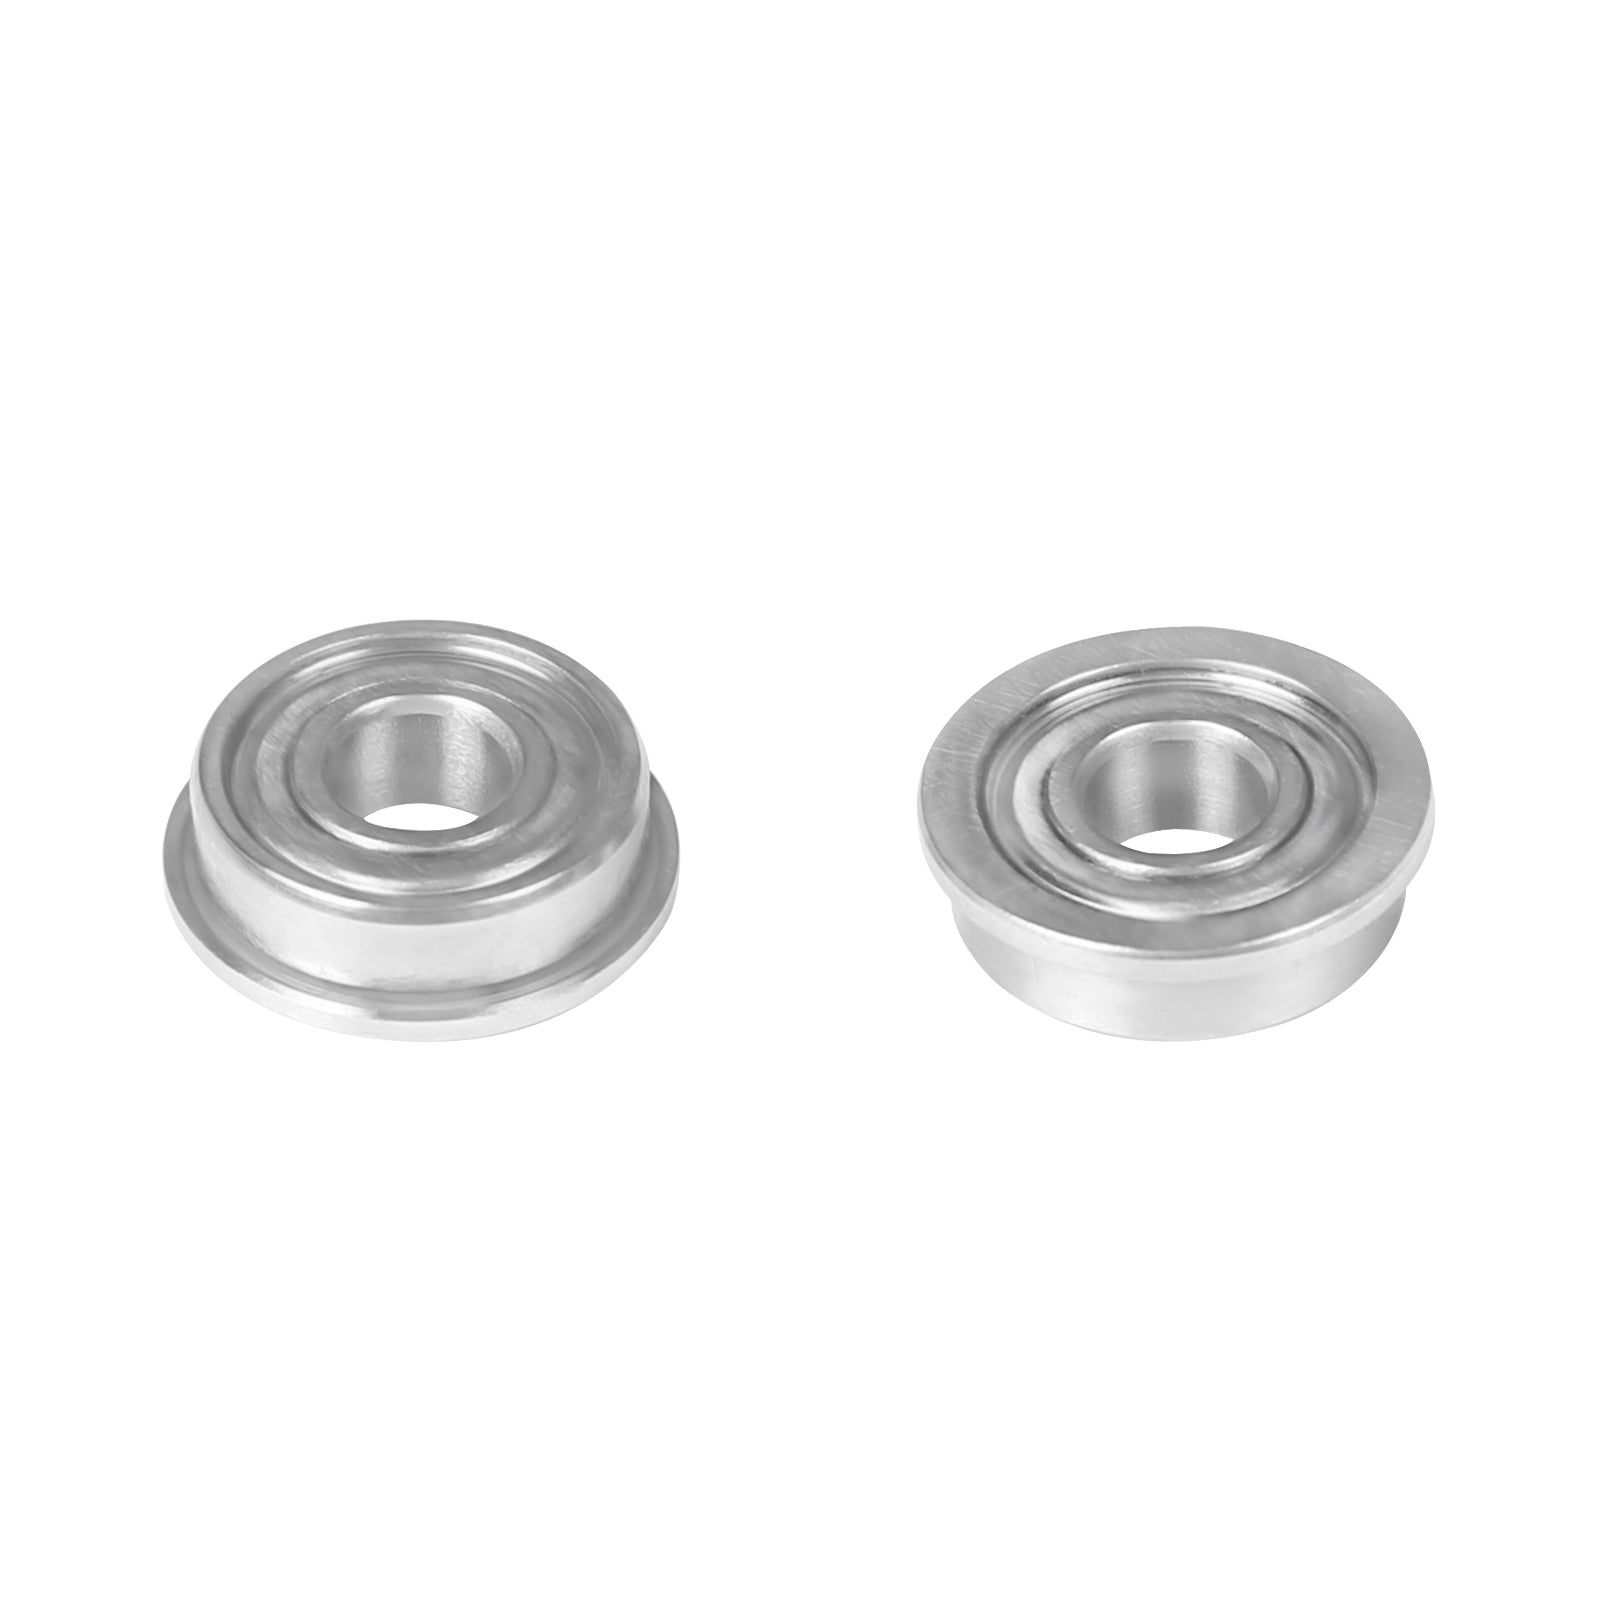 OMP HOBBY M7 Helicopter Parts Flanged Bearing _6x_15x5 OSHM7154